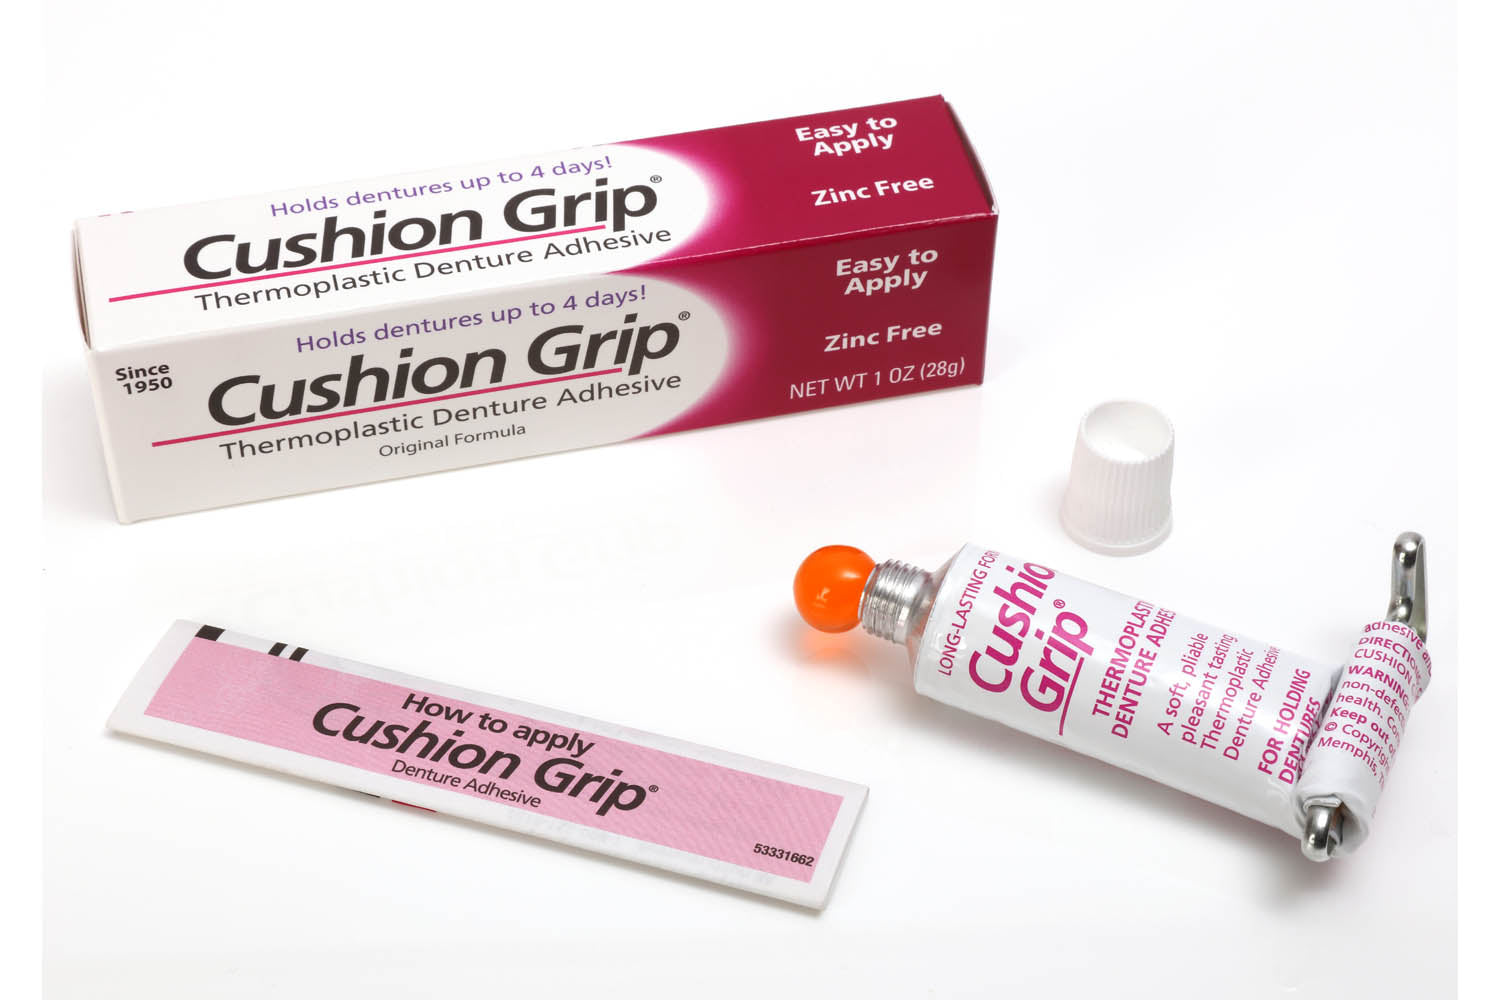 The Cushion Grip Denture Adhesive combines a soft liner and a mild adhesive.